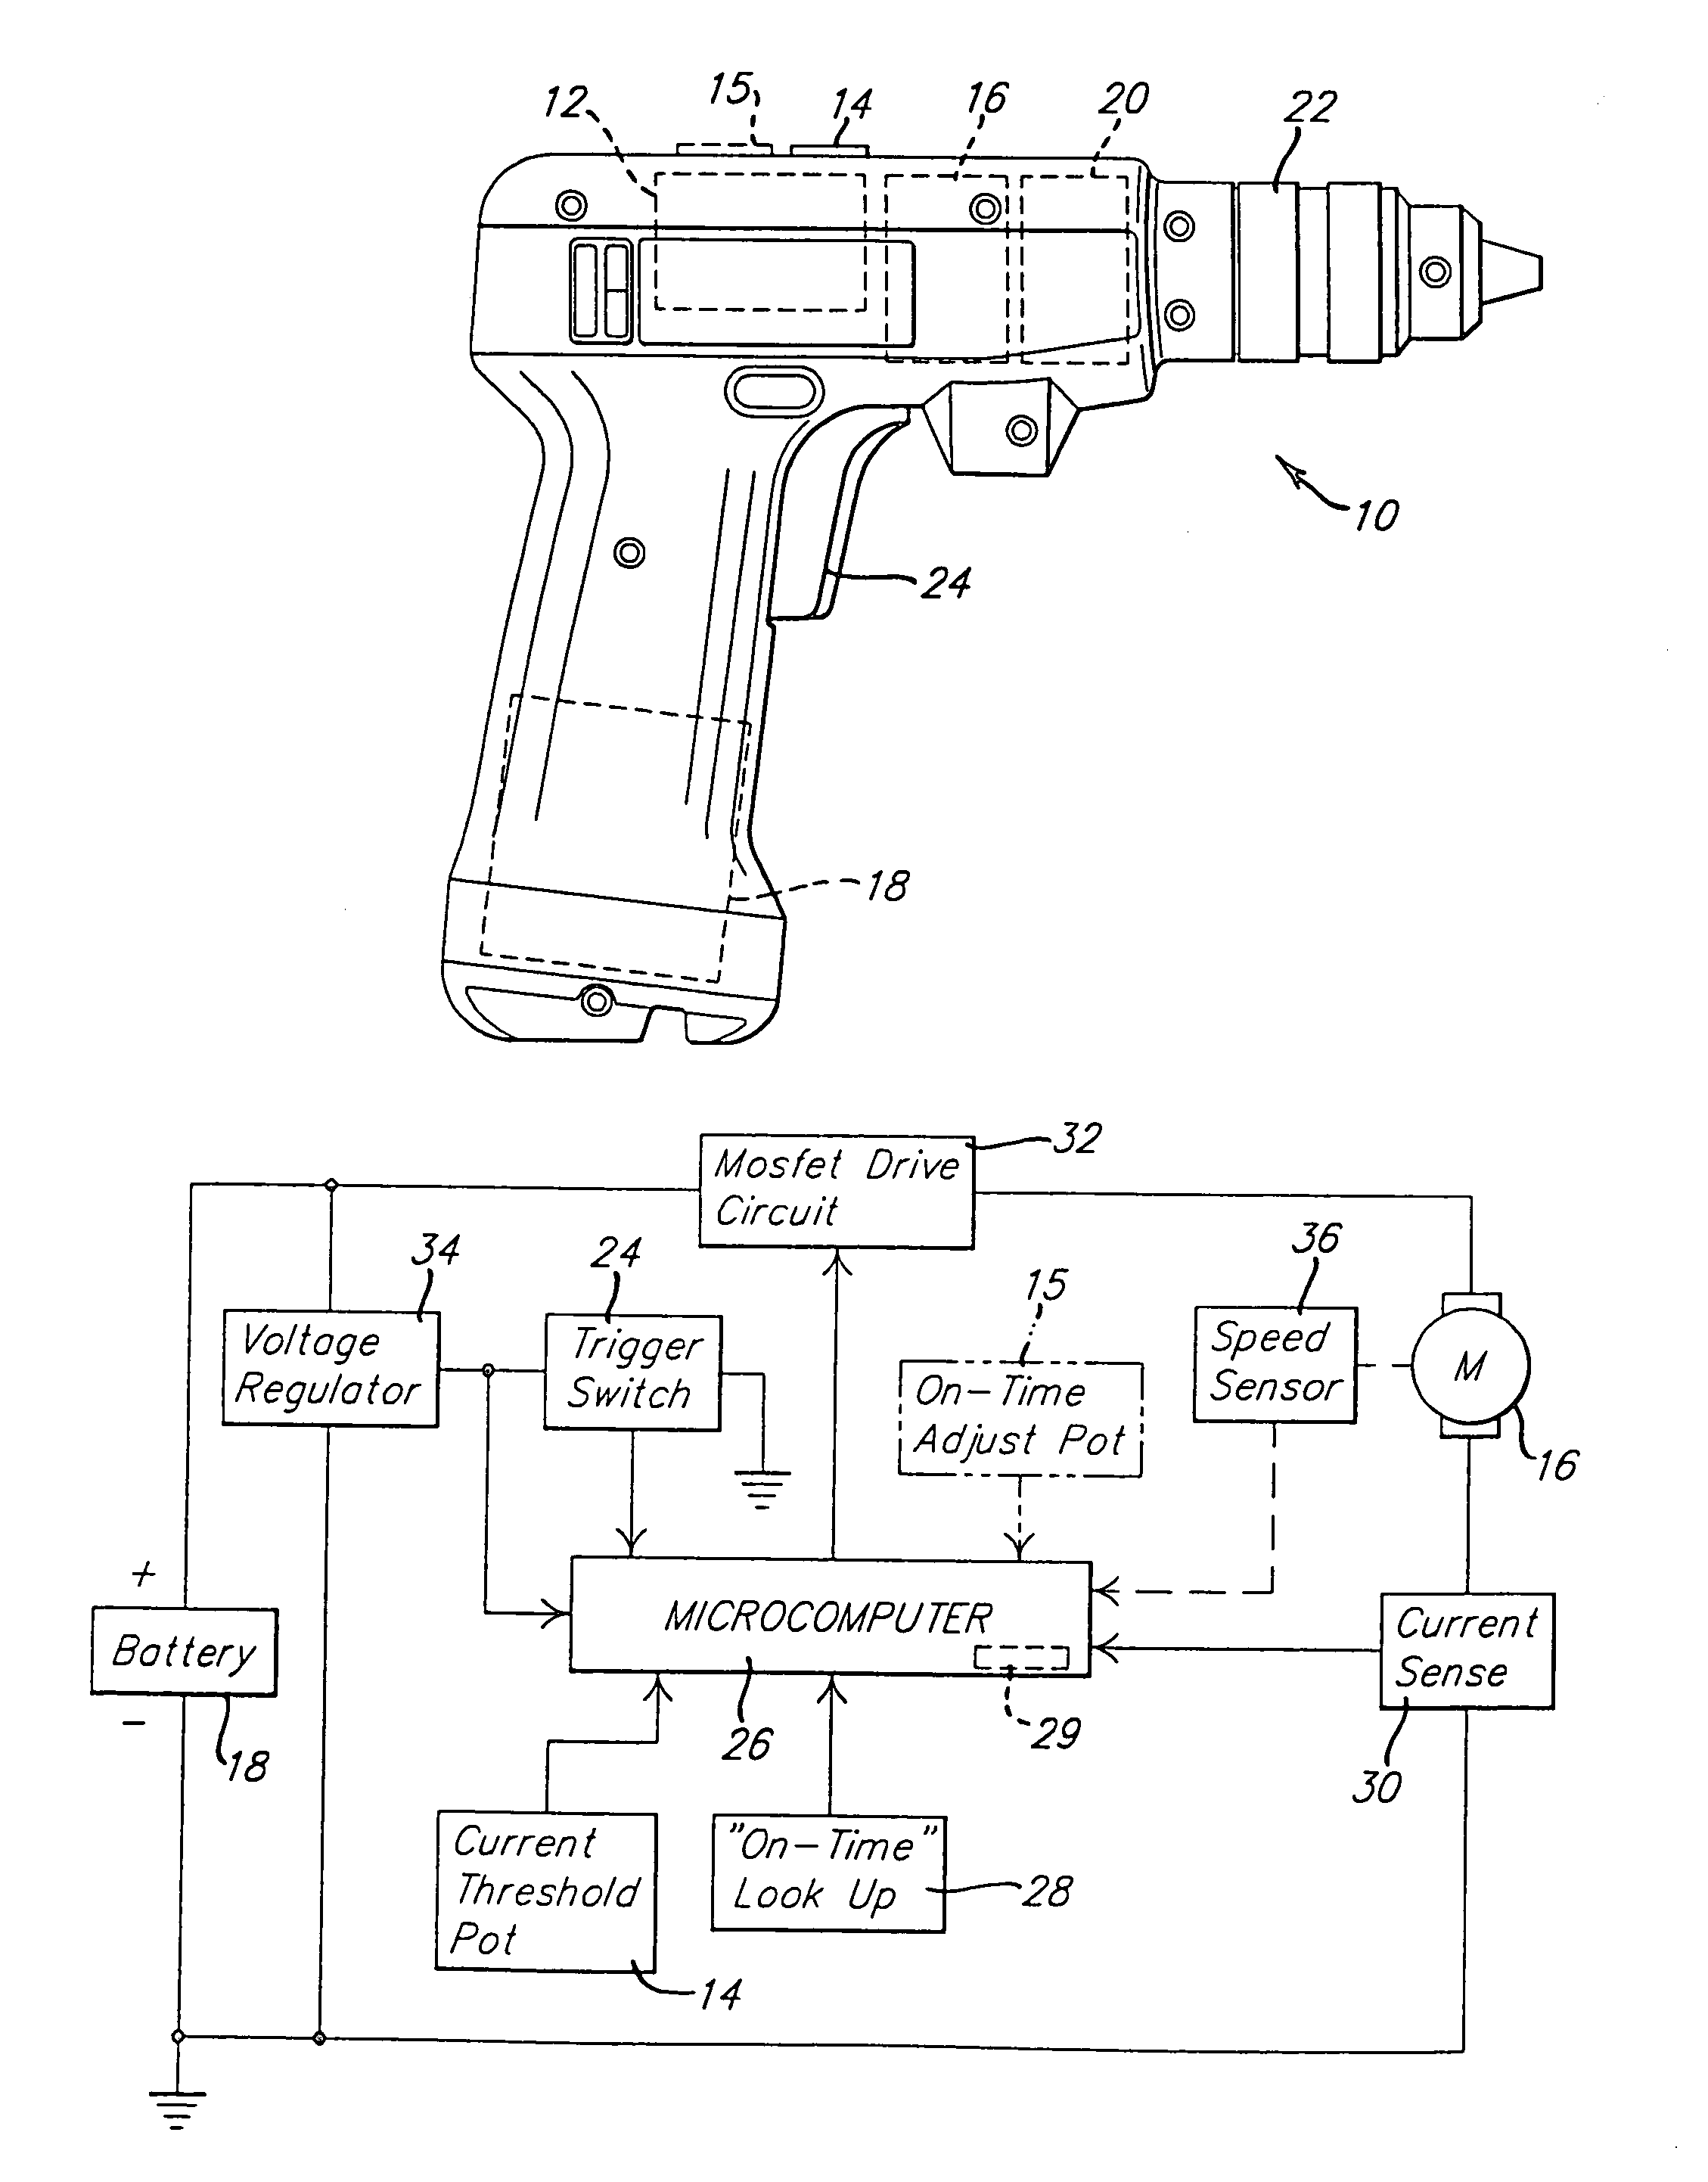 Electrical power tool having a motor control circuit for providing control over the torque output of the power tool